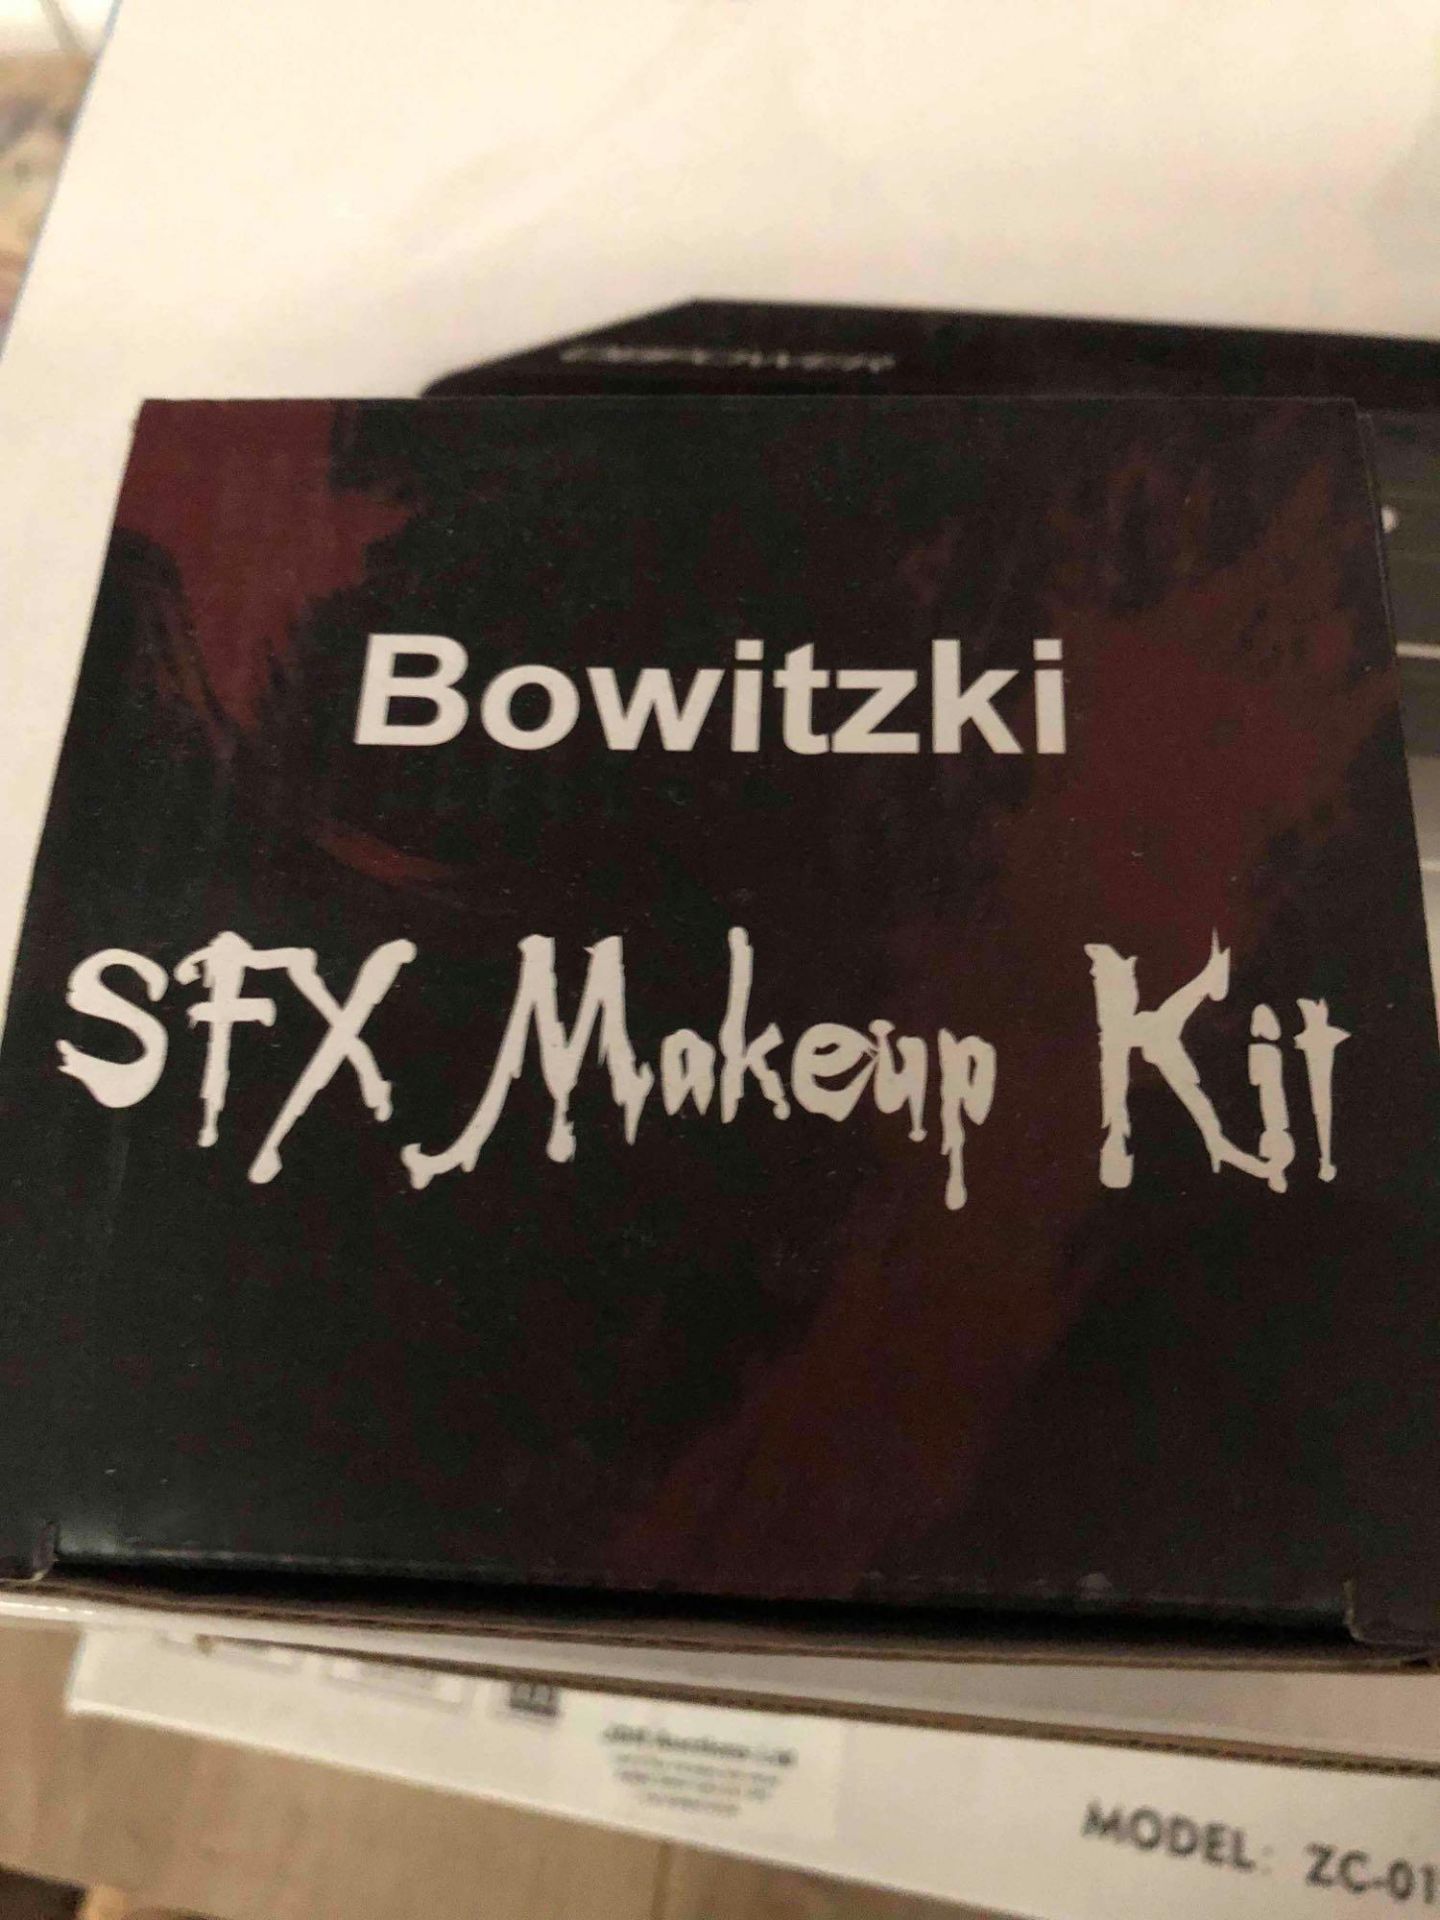 boxed Approx 30 units of SFX makeup Kits RRP £27.99 each Value £800 +